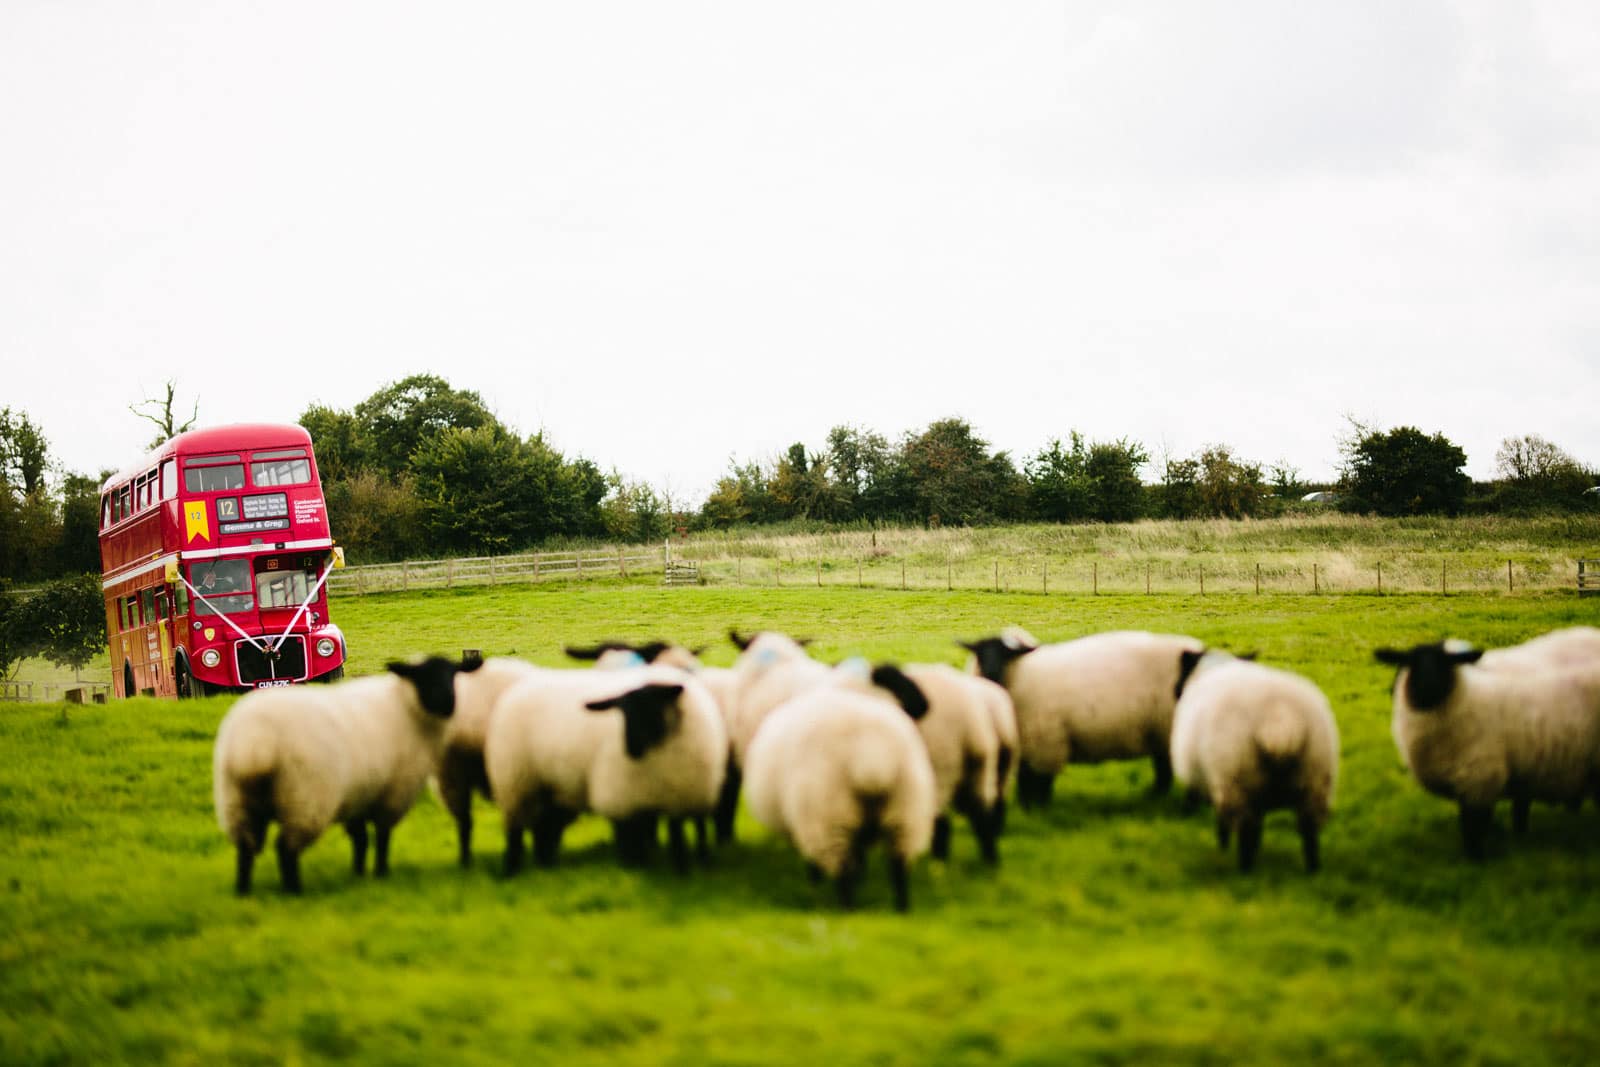 A double decker bus parked in a field with sheep, captured by the Dodford Manor Wedding Photographer.